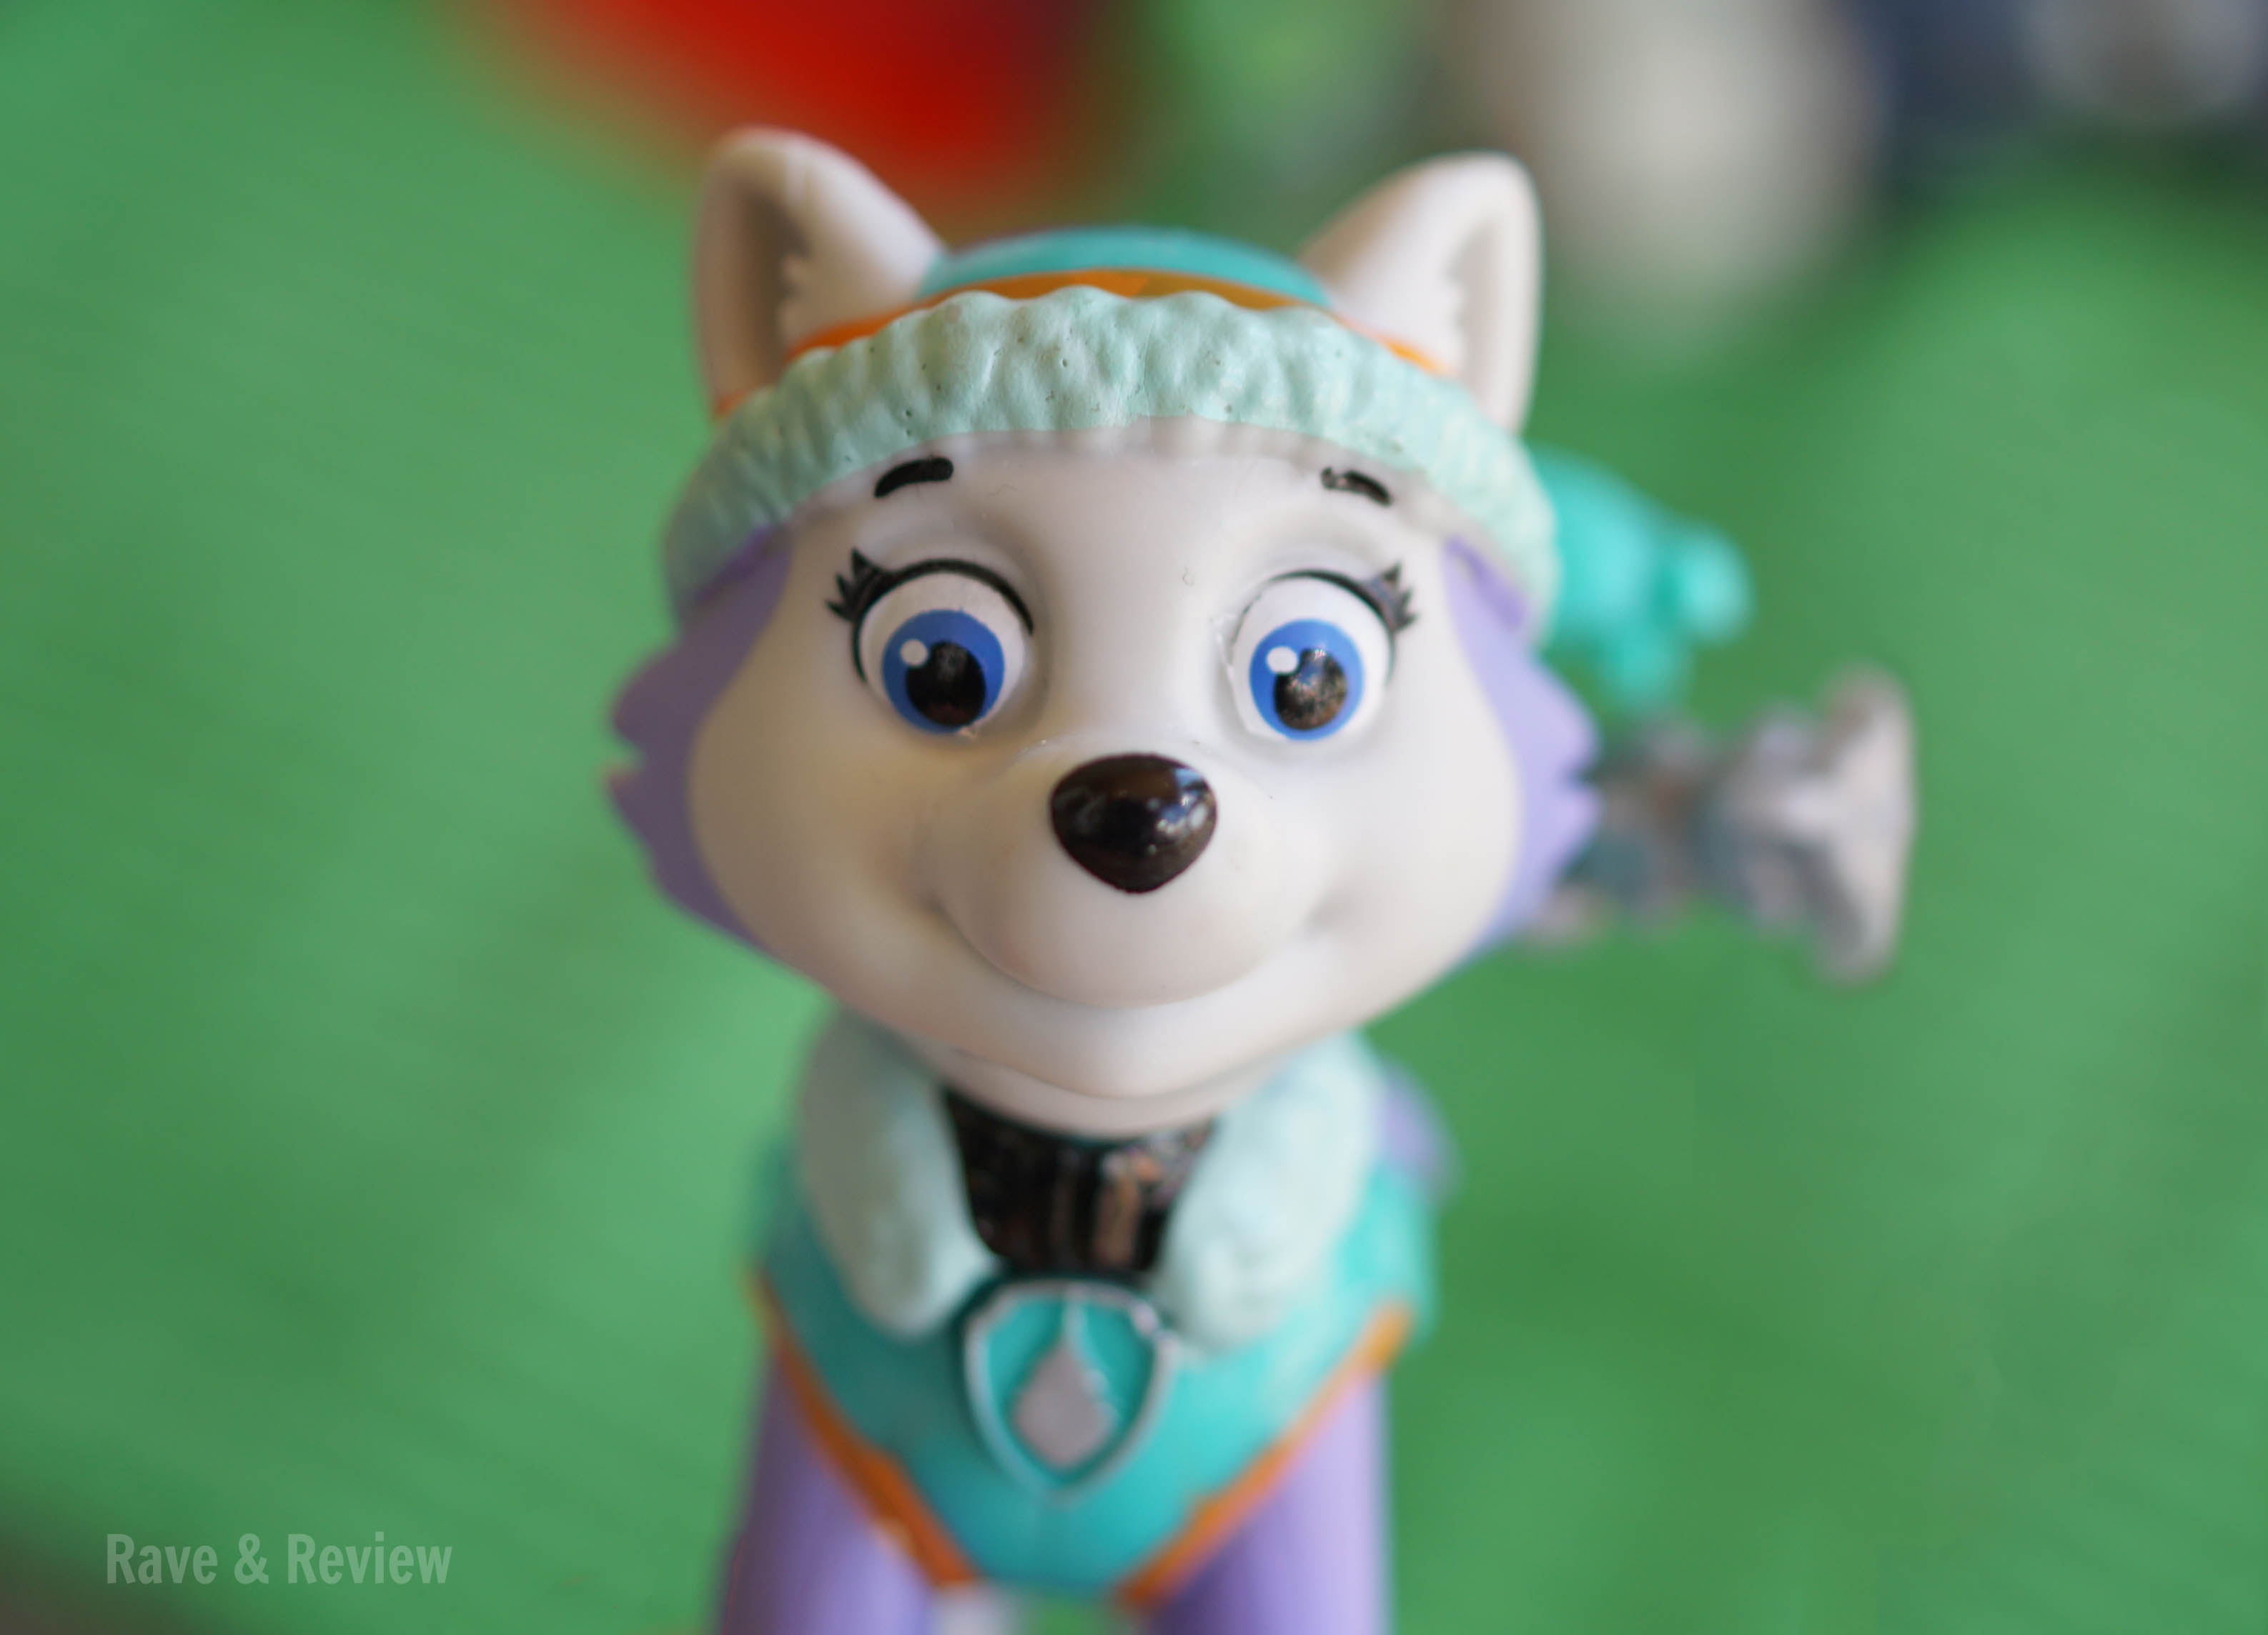 85 thoughts every parent has while watching Paw Patrol